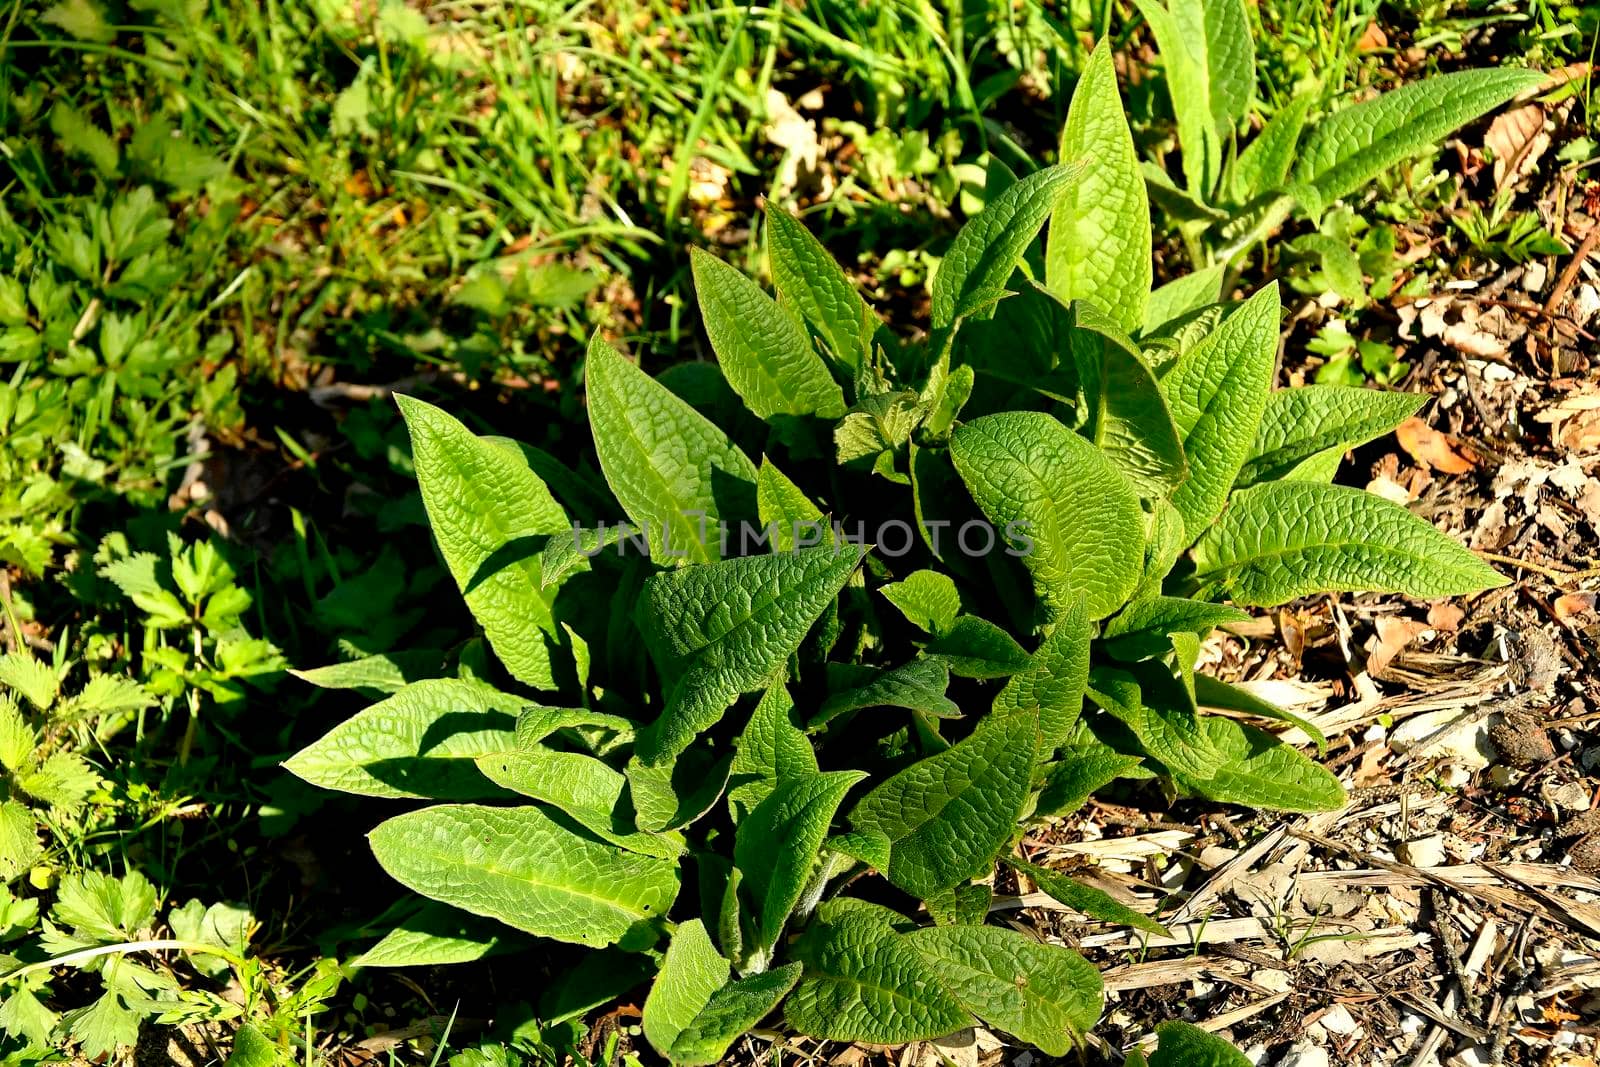 comfrey, young fresh leaves in spring